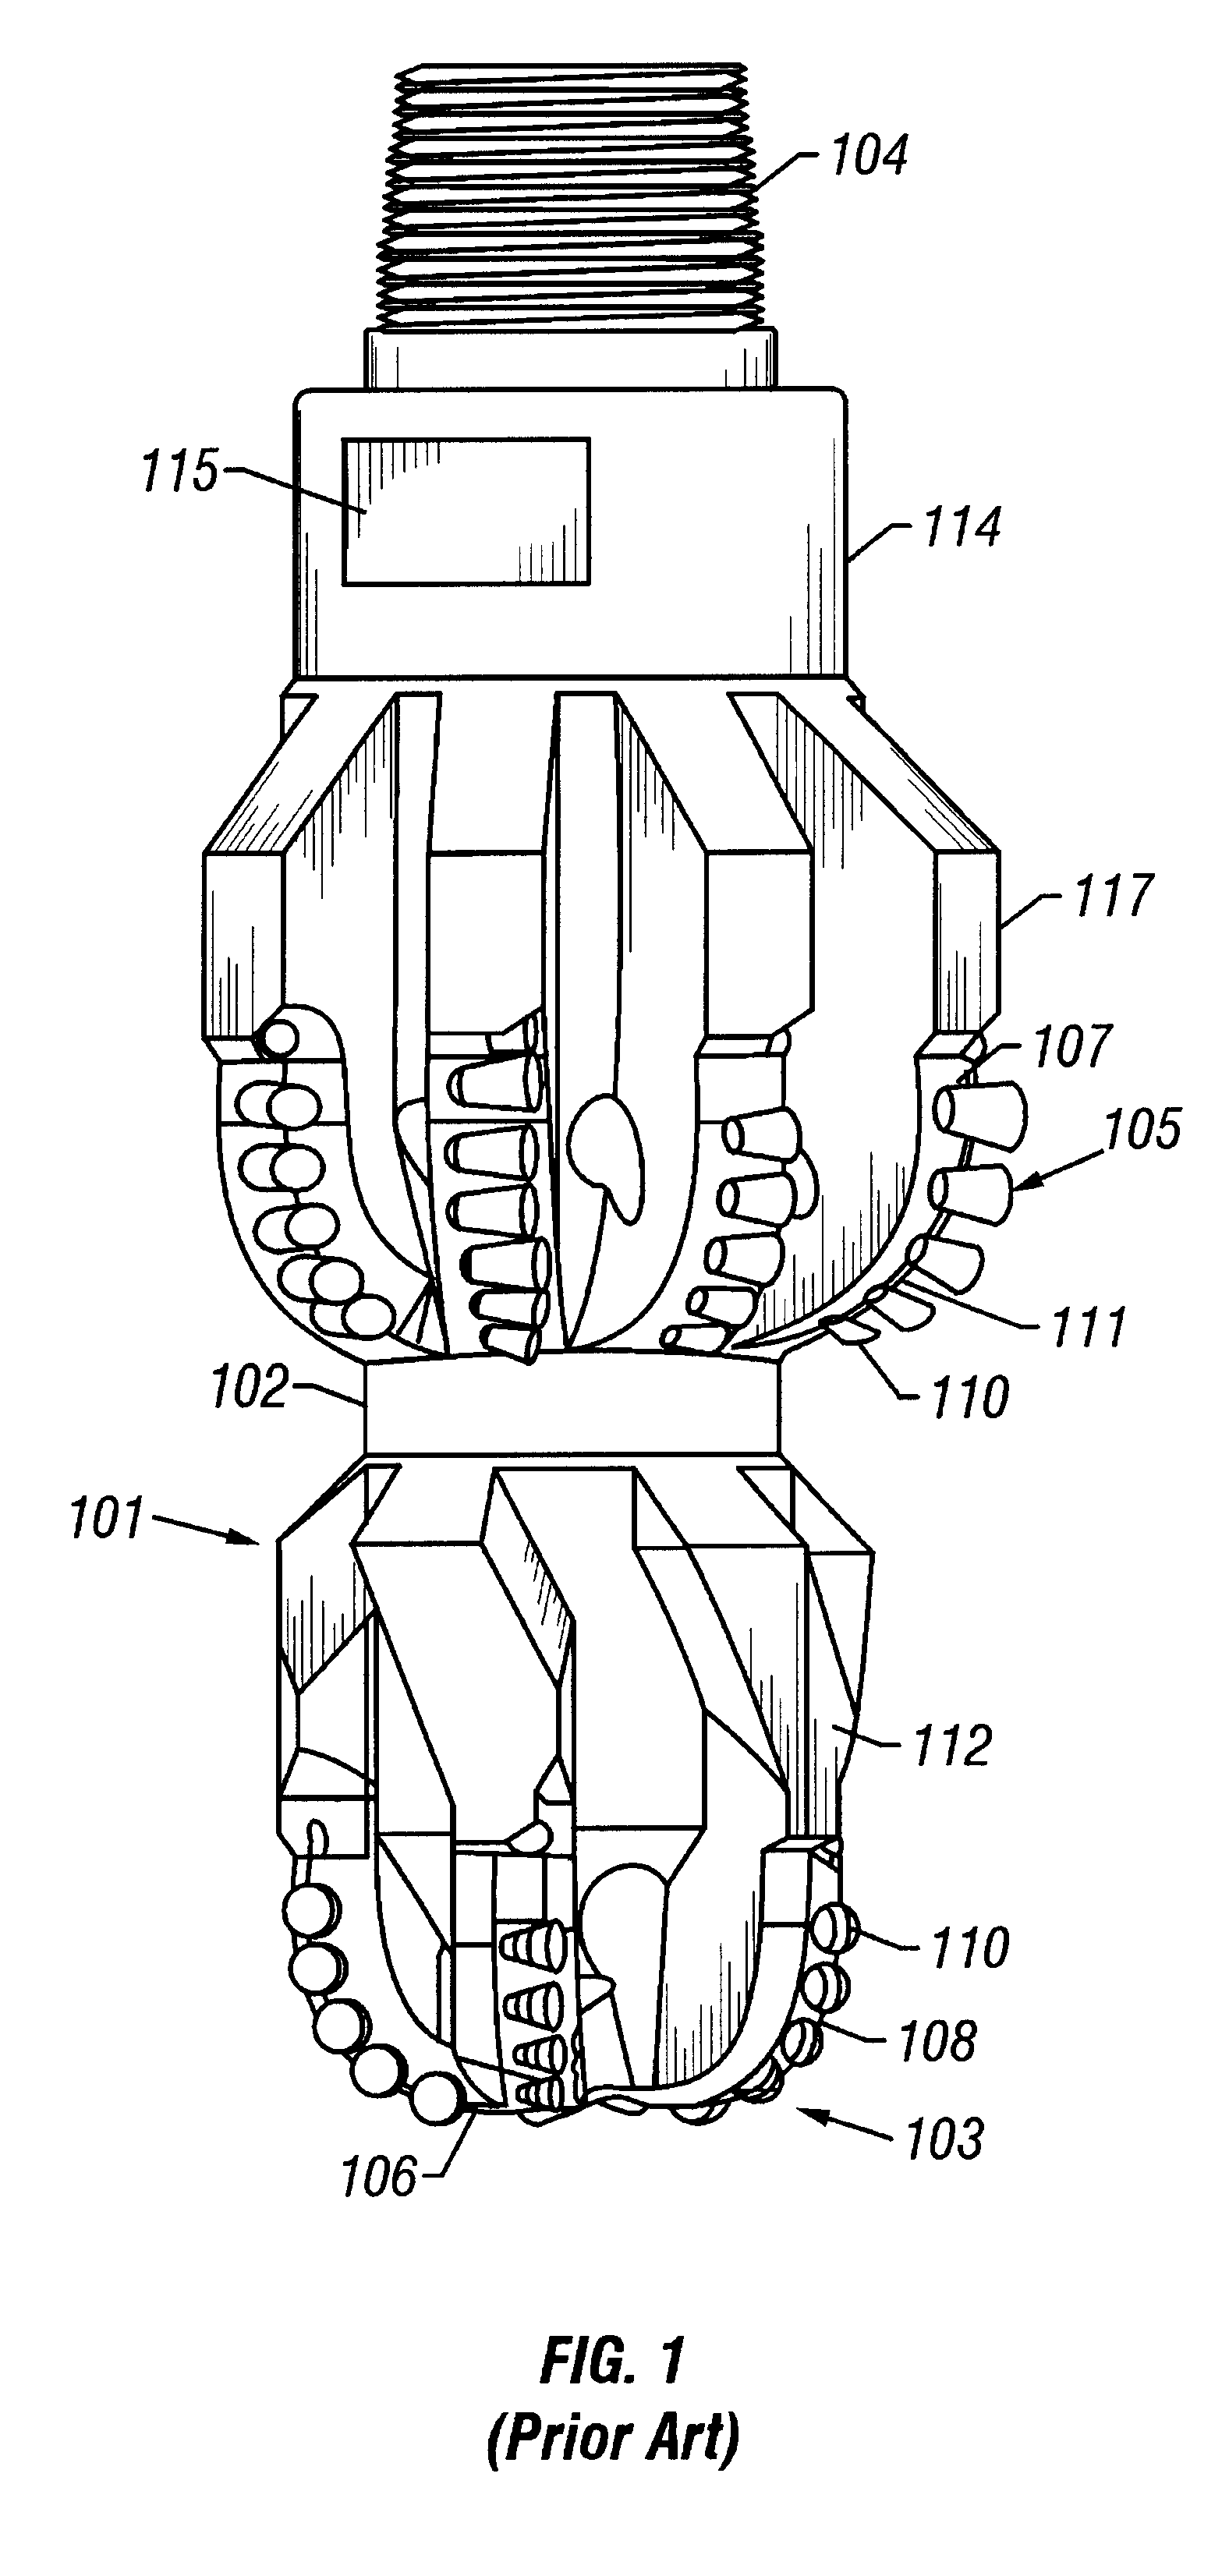 Bi-centered drill bit having improved drilling stability mud hydraulics and resistance to cutter damage